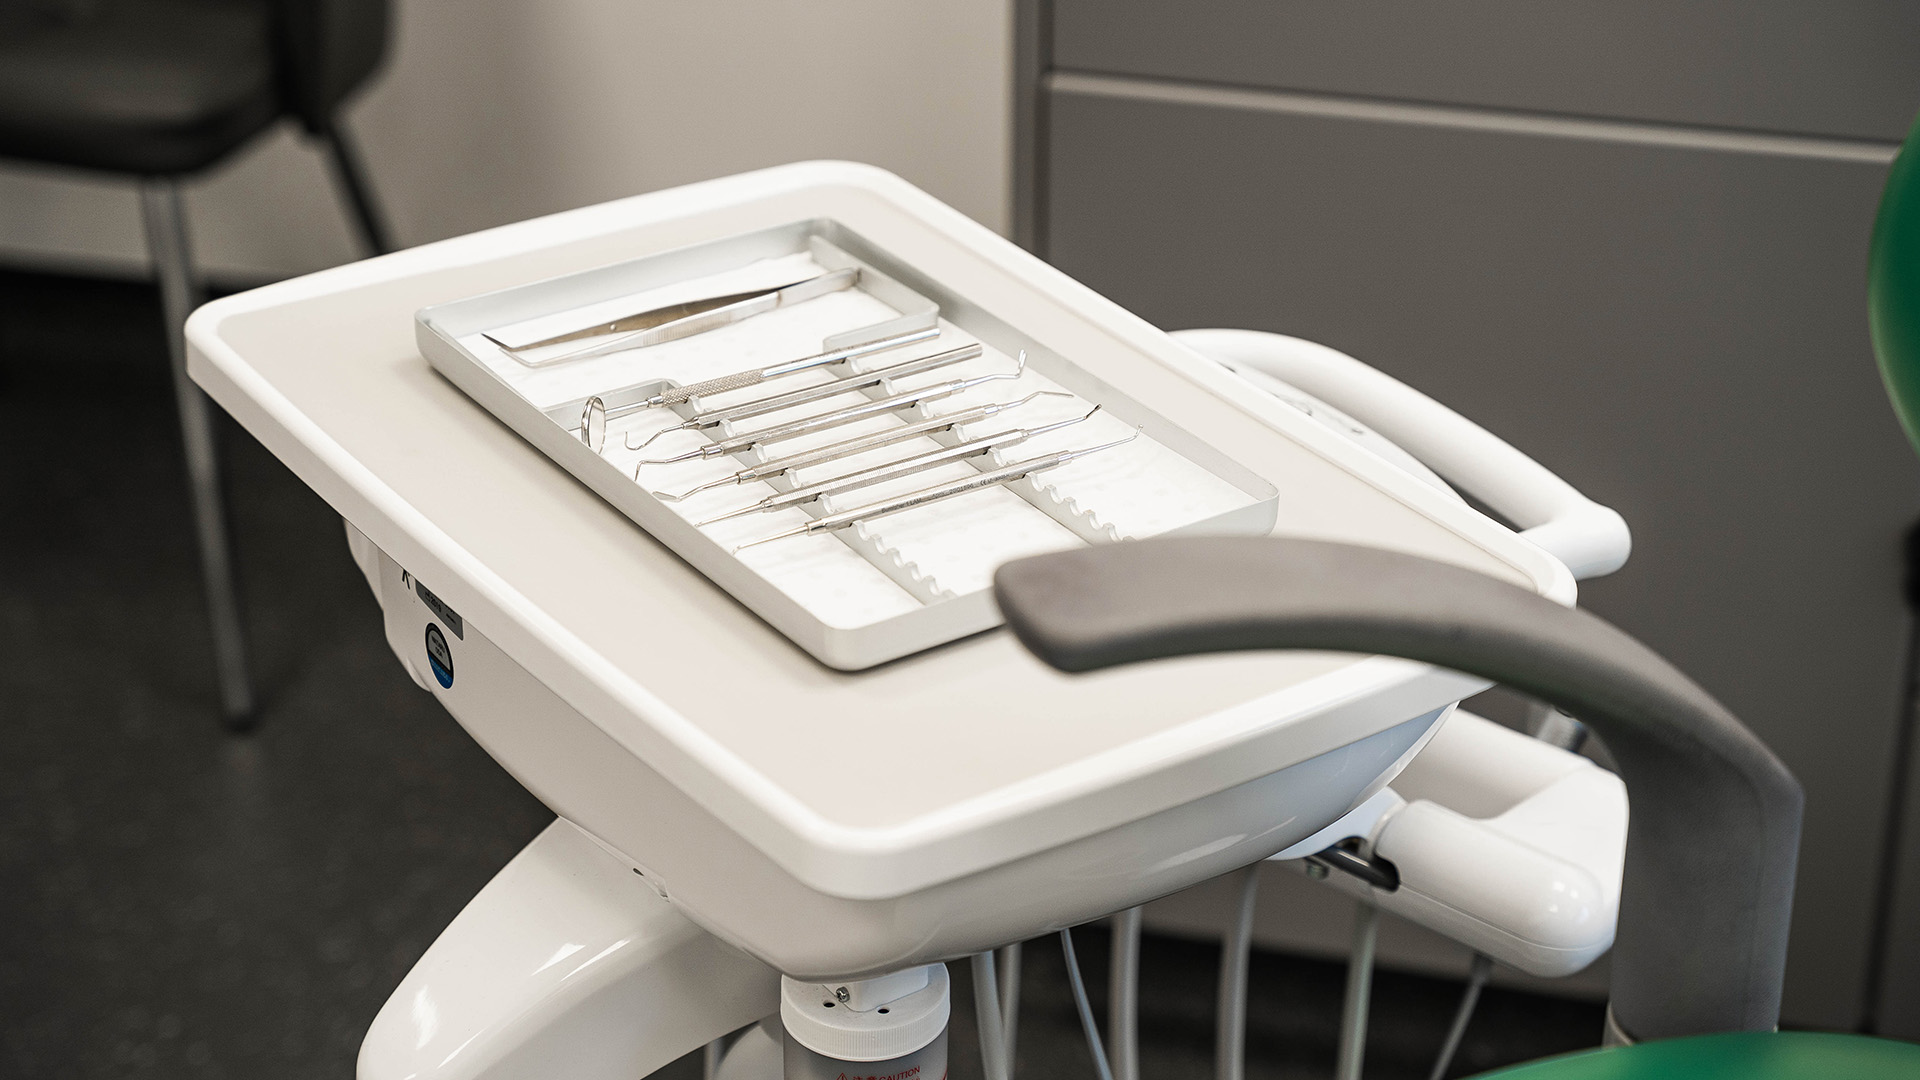 Dentists tools lined up on a tray next to a dentists chair.